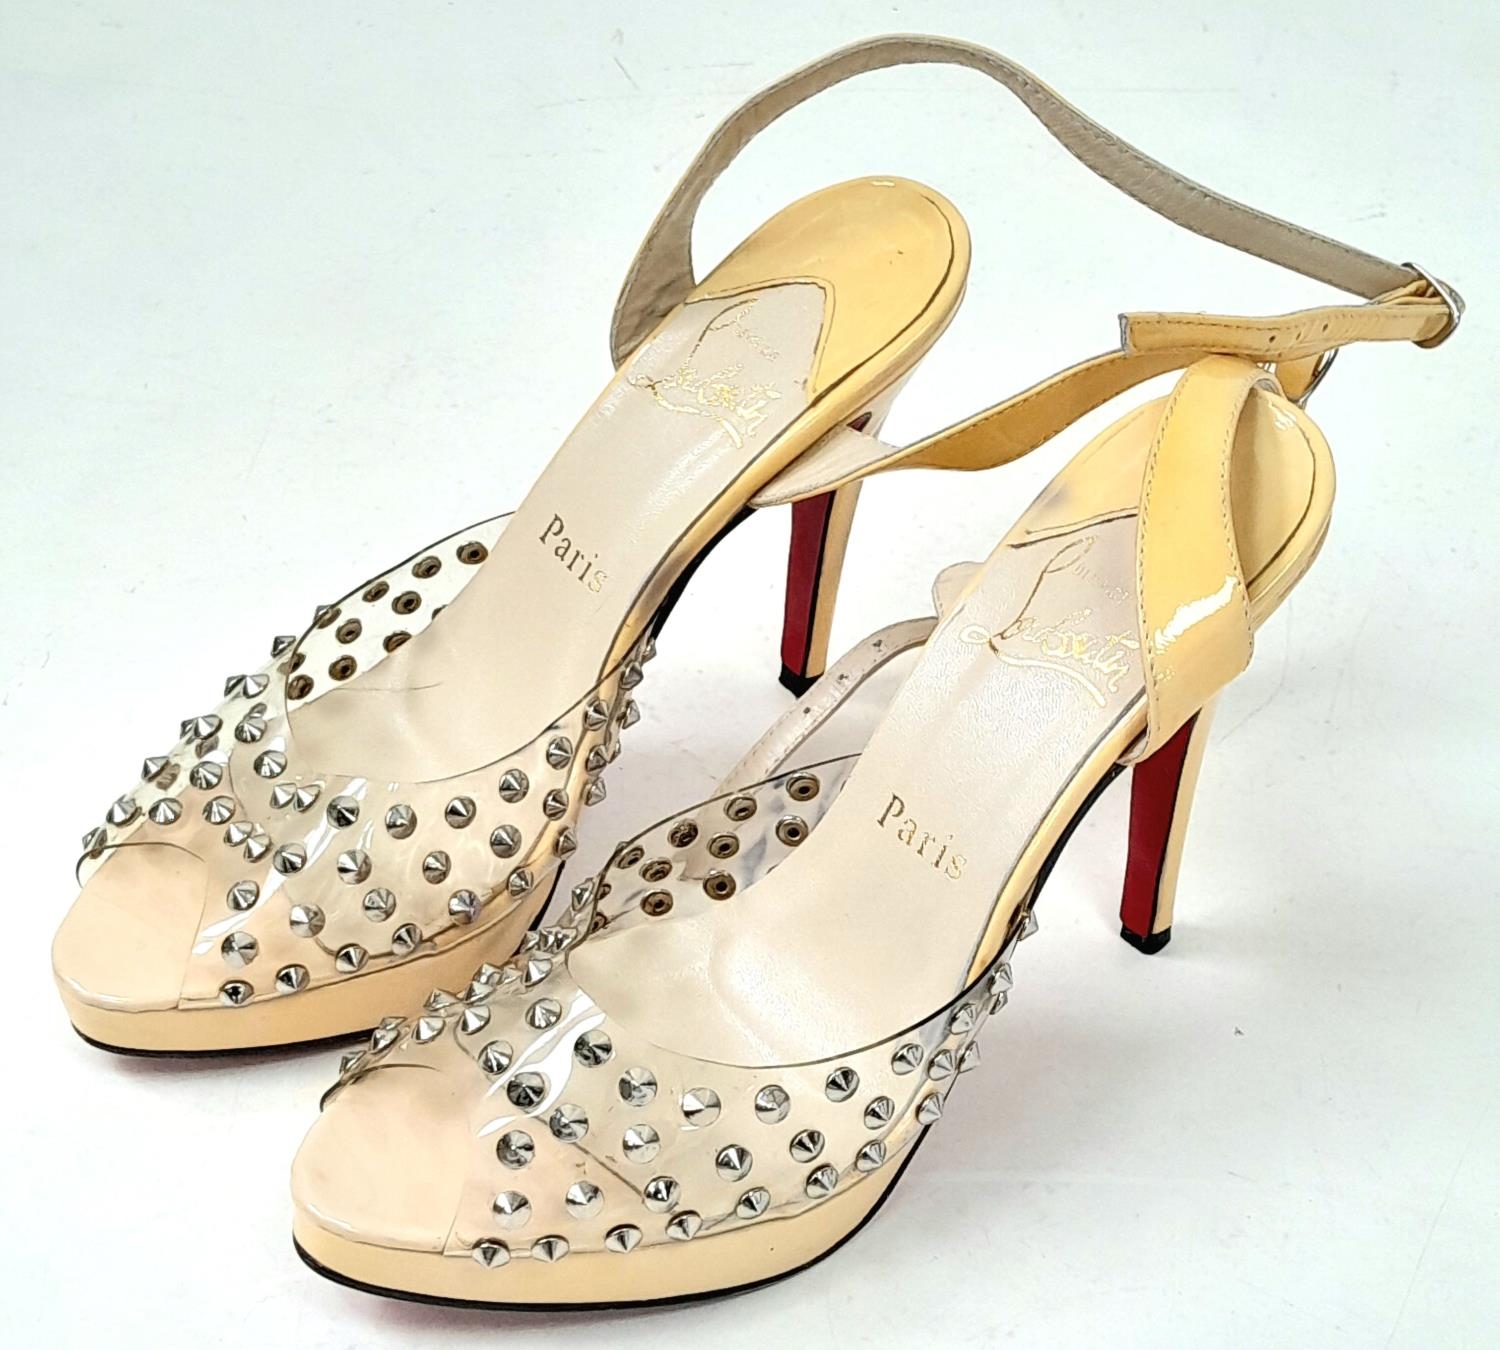 A pair of lightly used high heel (4inch) shoes by Louboutin.